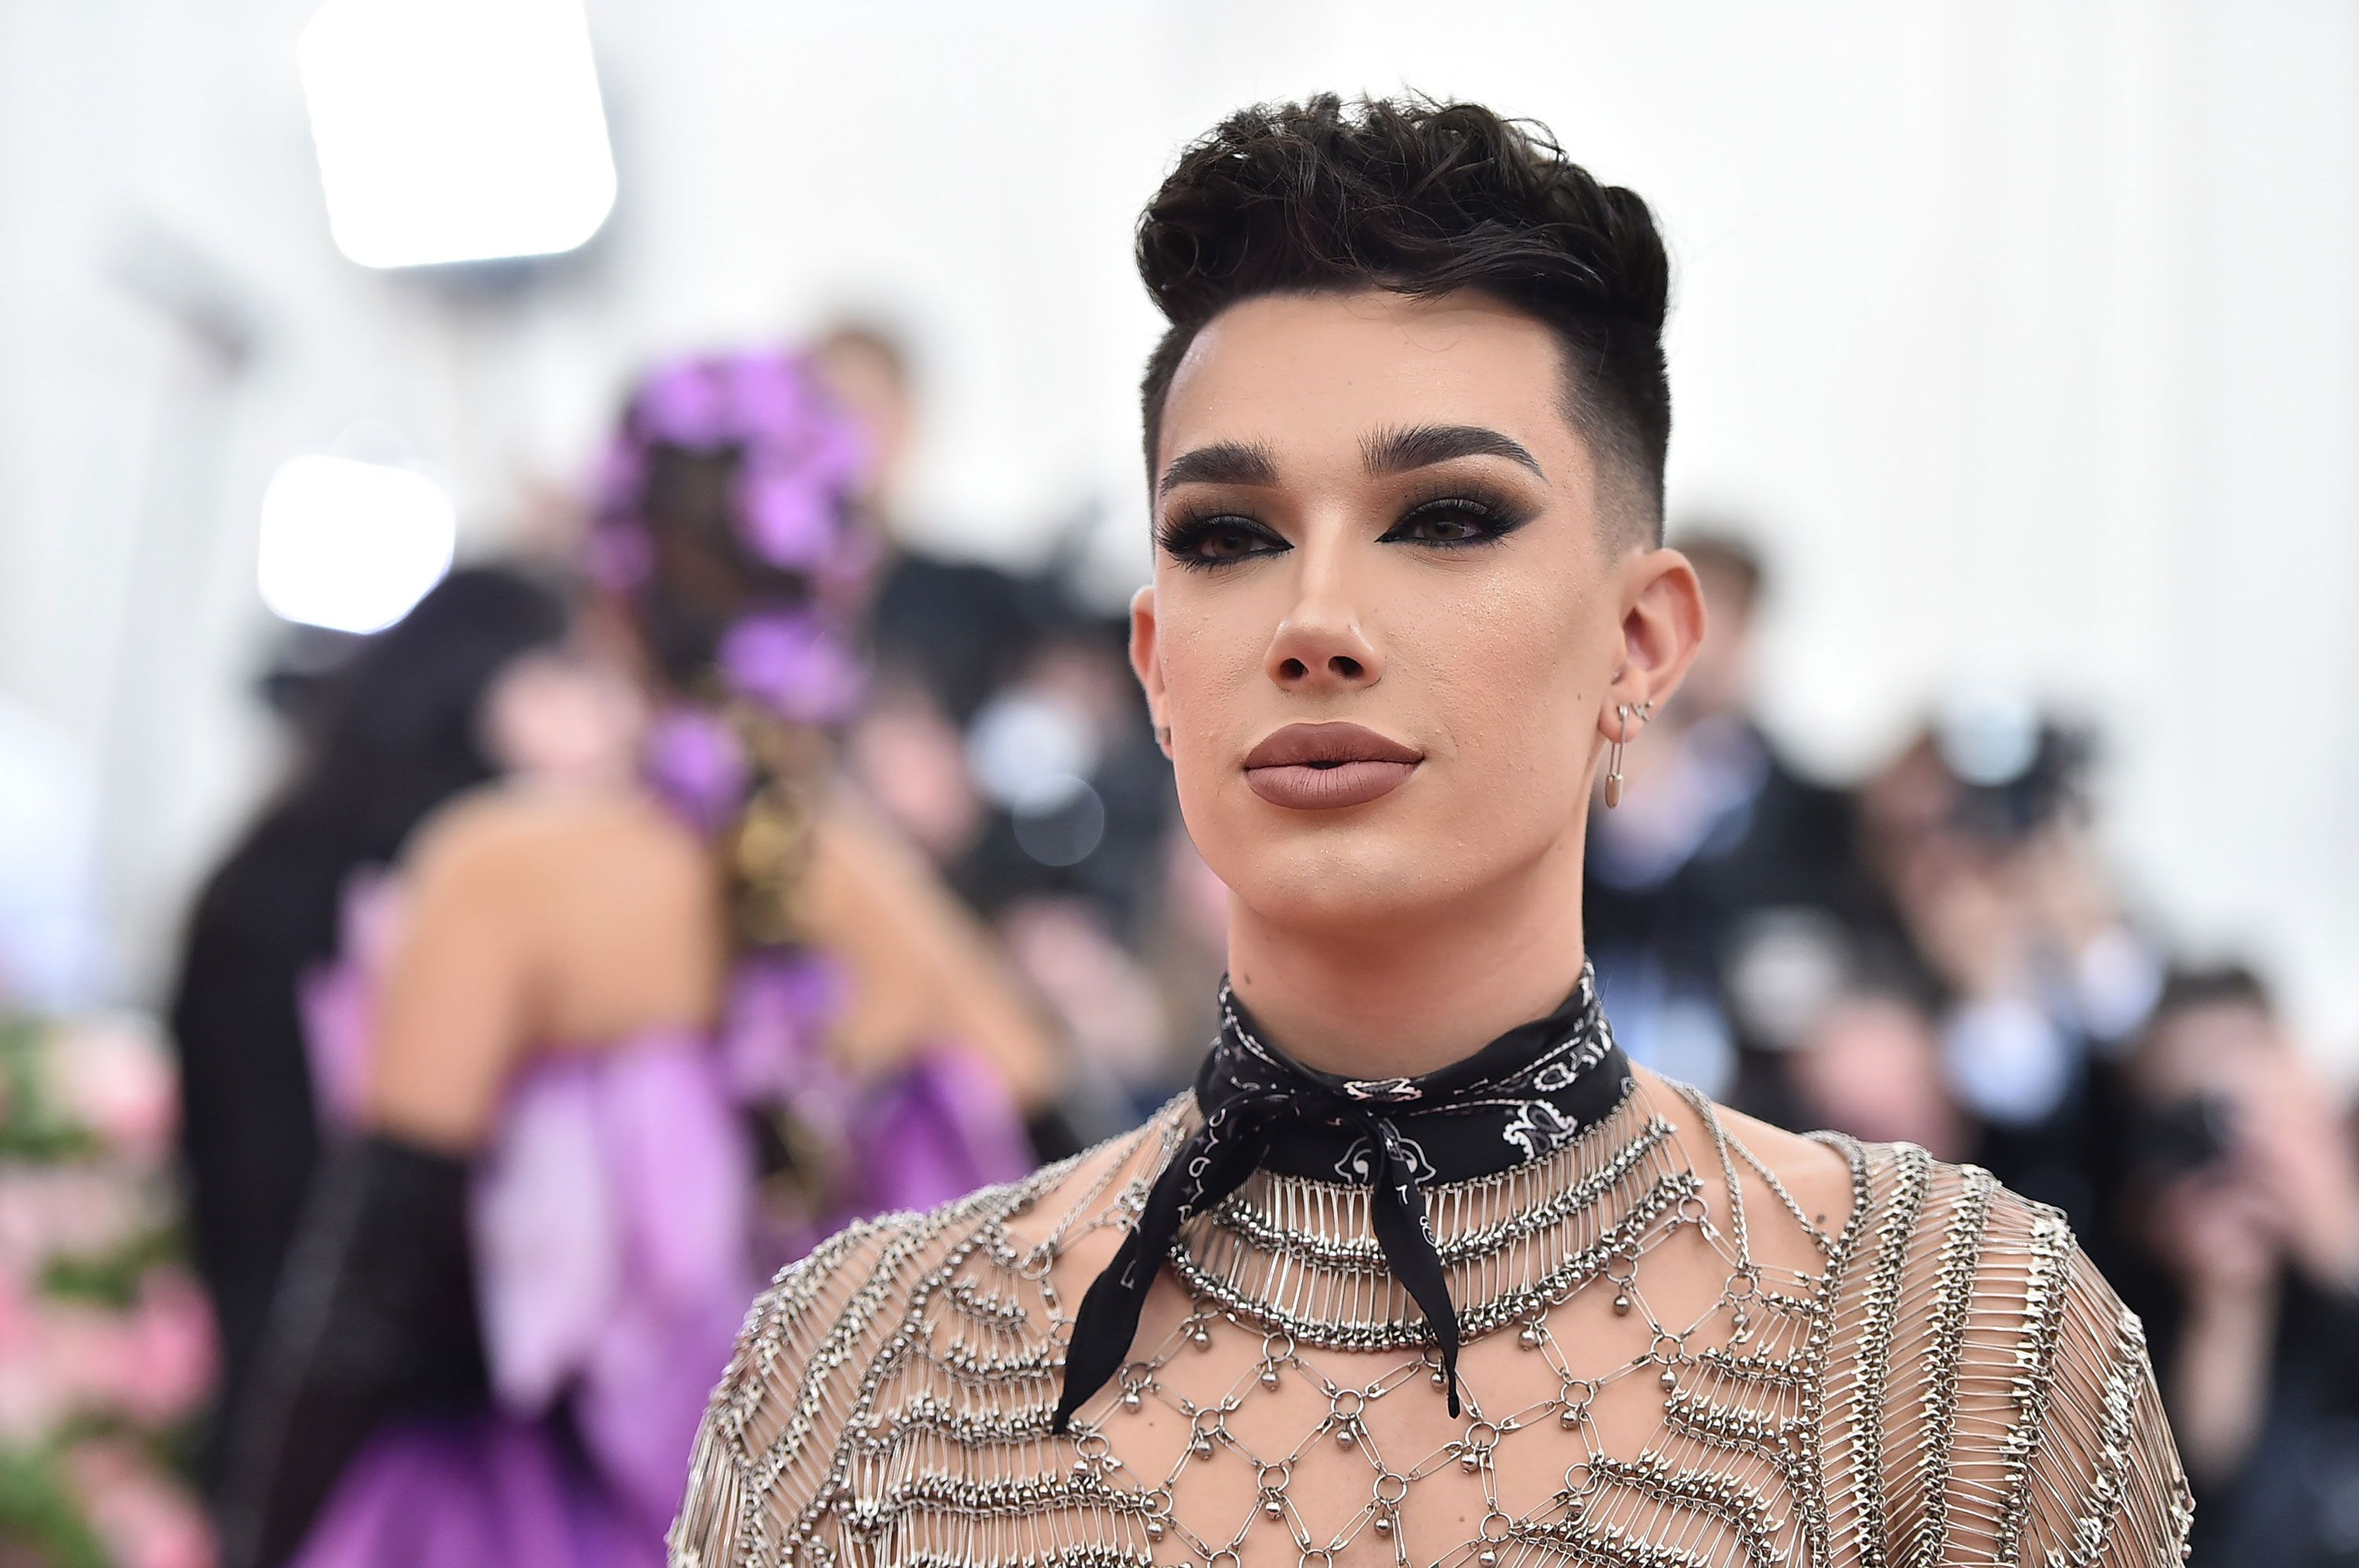 Teen Boys One Girl Sex Video - A Timeline of James Charles Allegations and Controversies